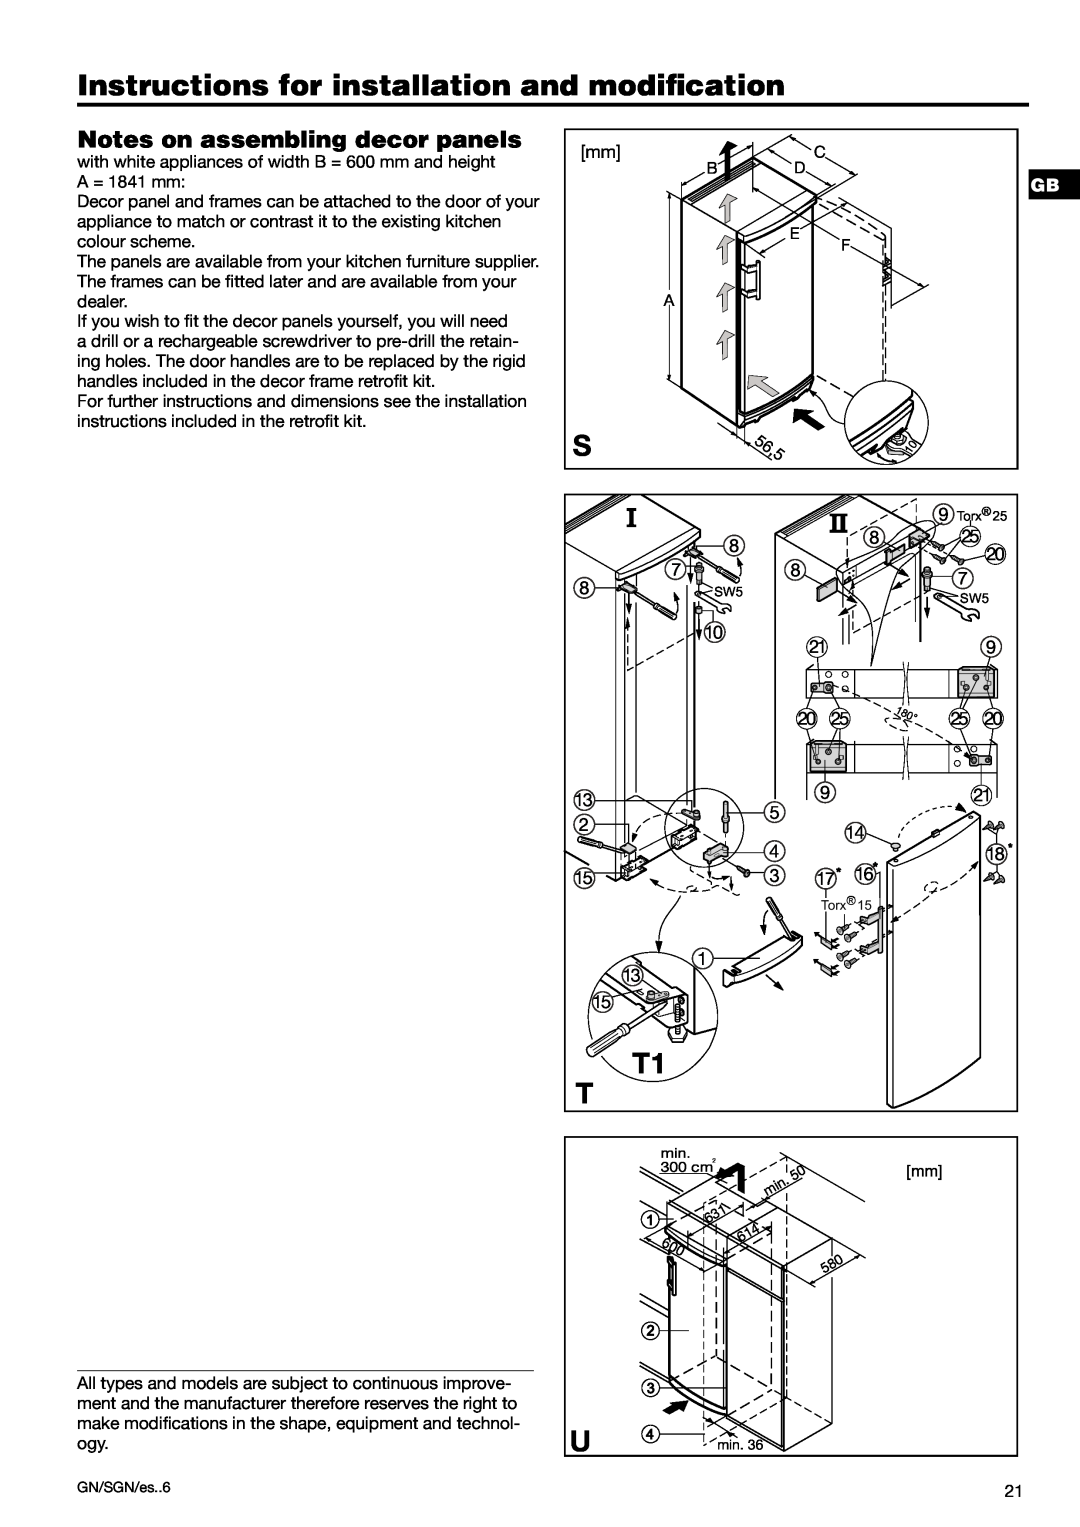 Liebherr 7082 300-03 manual Notes on assembling decor panels, Instructions for installation and modiﬁcation, T1 T, 56,5 